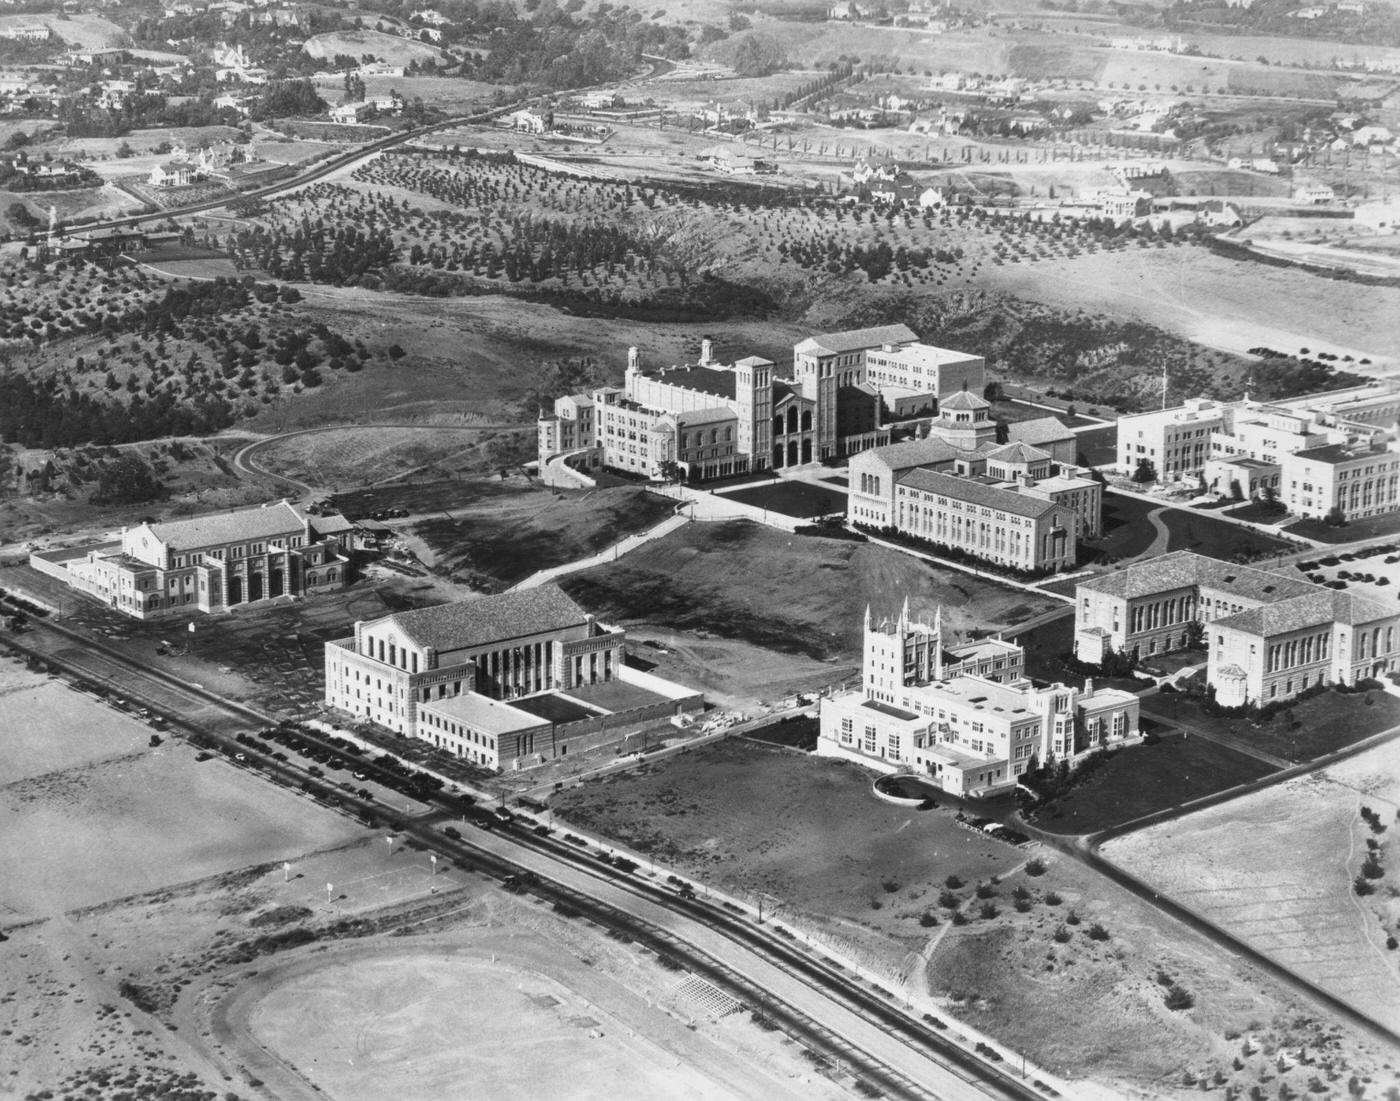 Aerial view of the Westwood campus of the University of California, with the Royce Hall building (top, centre), Kerckhoff Hall (bottom, right) in the Westwood neighbourhood of Los Angeles, 1934.